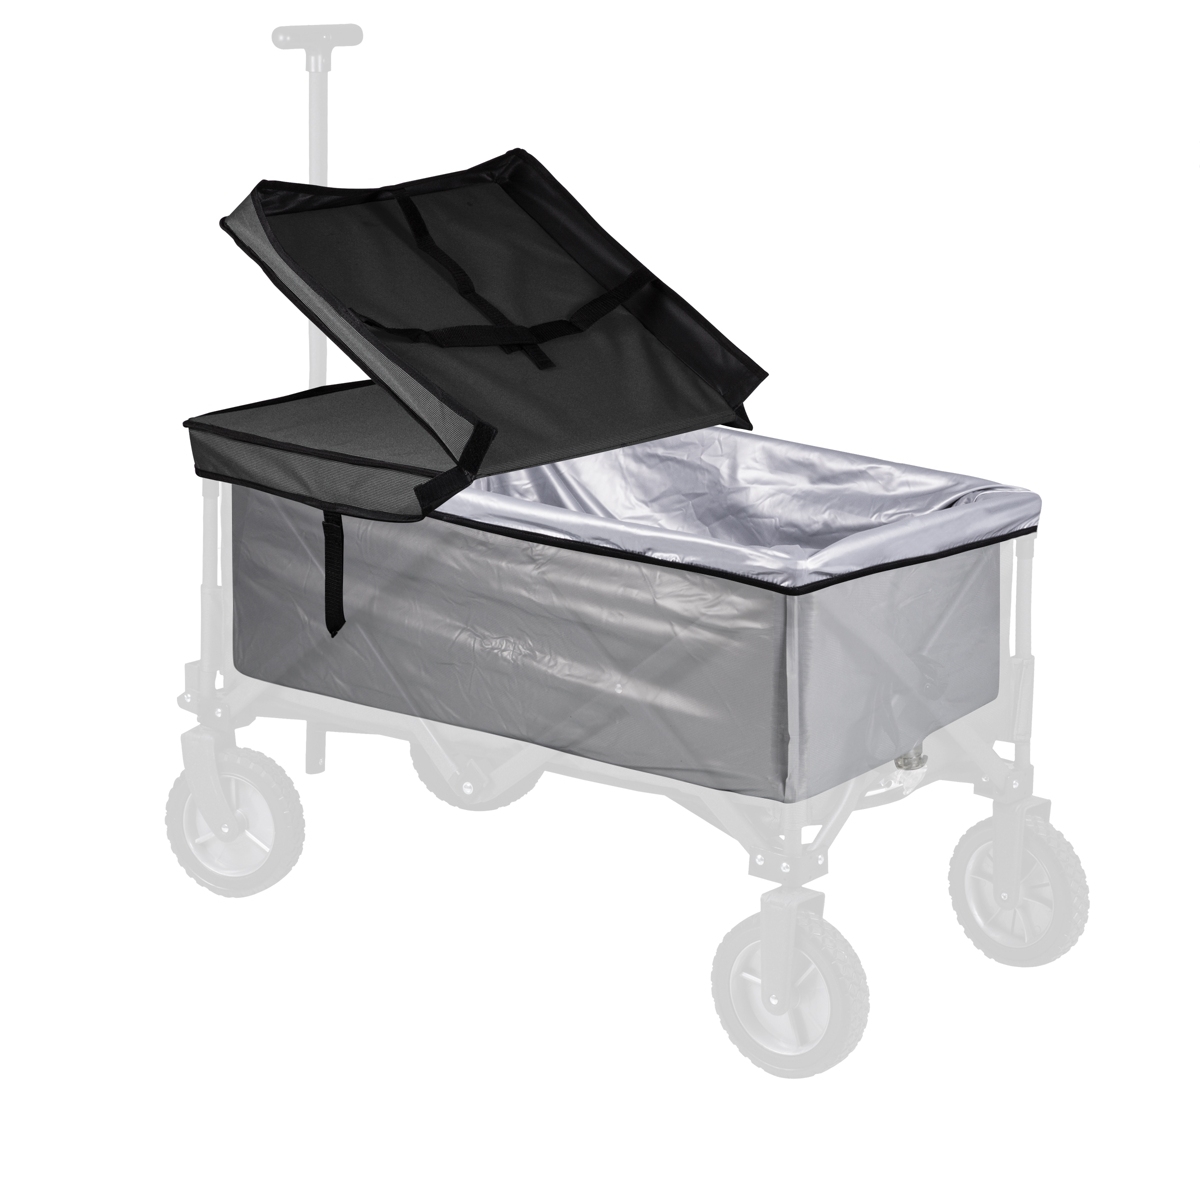 by Picnic Time Adventure Wagon Grey Upgrade Kit - Grey